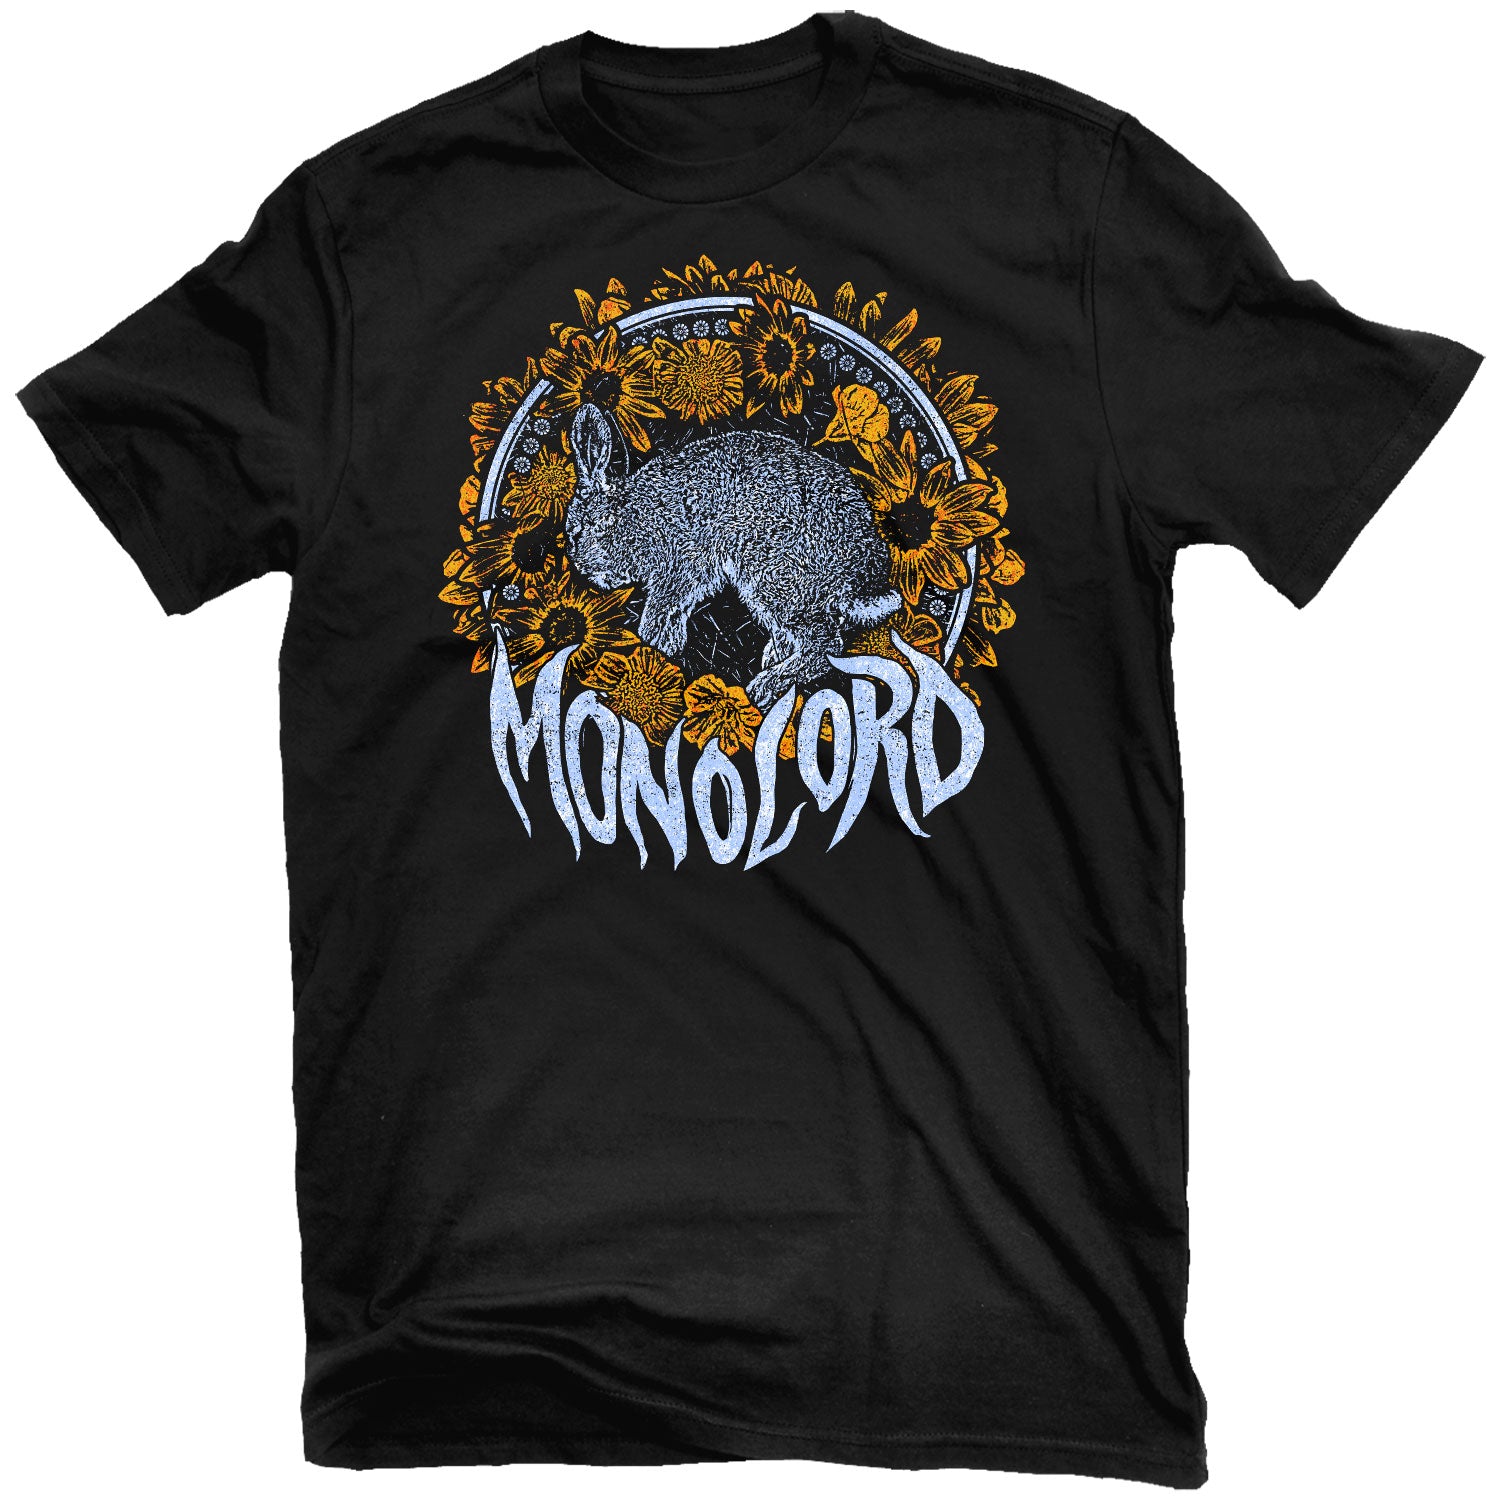 Monolord "Your Time To Shine" T-Shirt